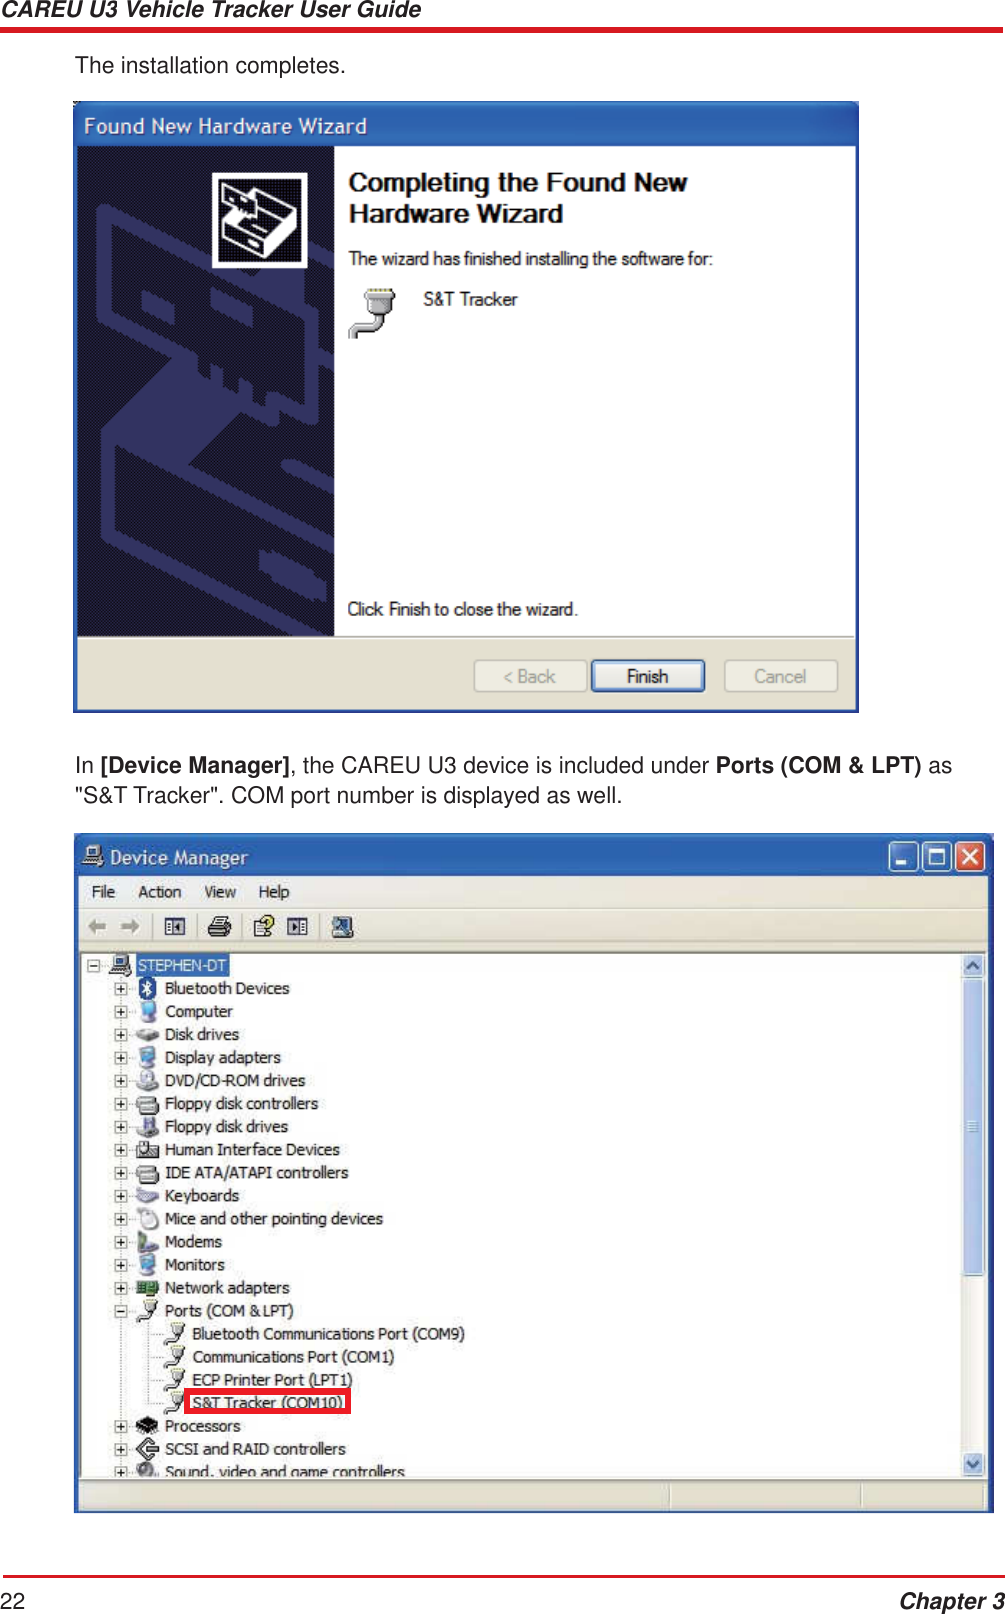 CAREU U3 Vehicle Tracker User Guide 22 Chapter 3     The installation completes.     In [Device Manager], the CAREU U3 device is included under Ports (COM &amp; LPT) as &quot;S&amp;T Tracker&quot;. COM port number is displayed as well. 